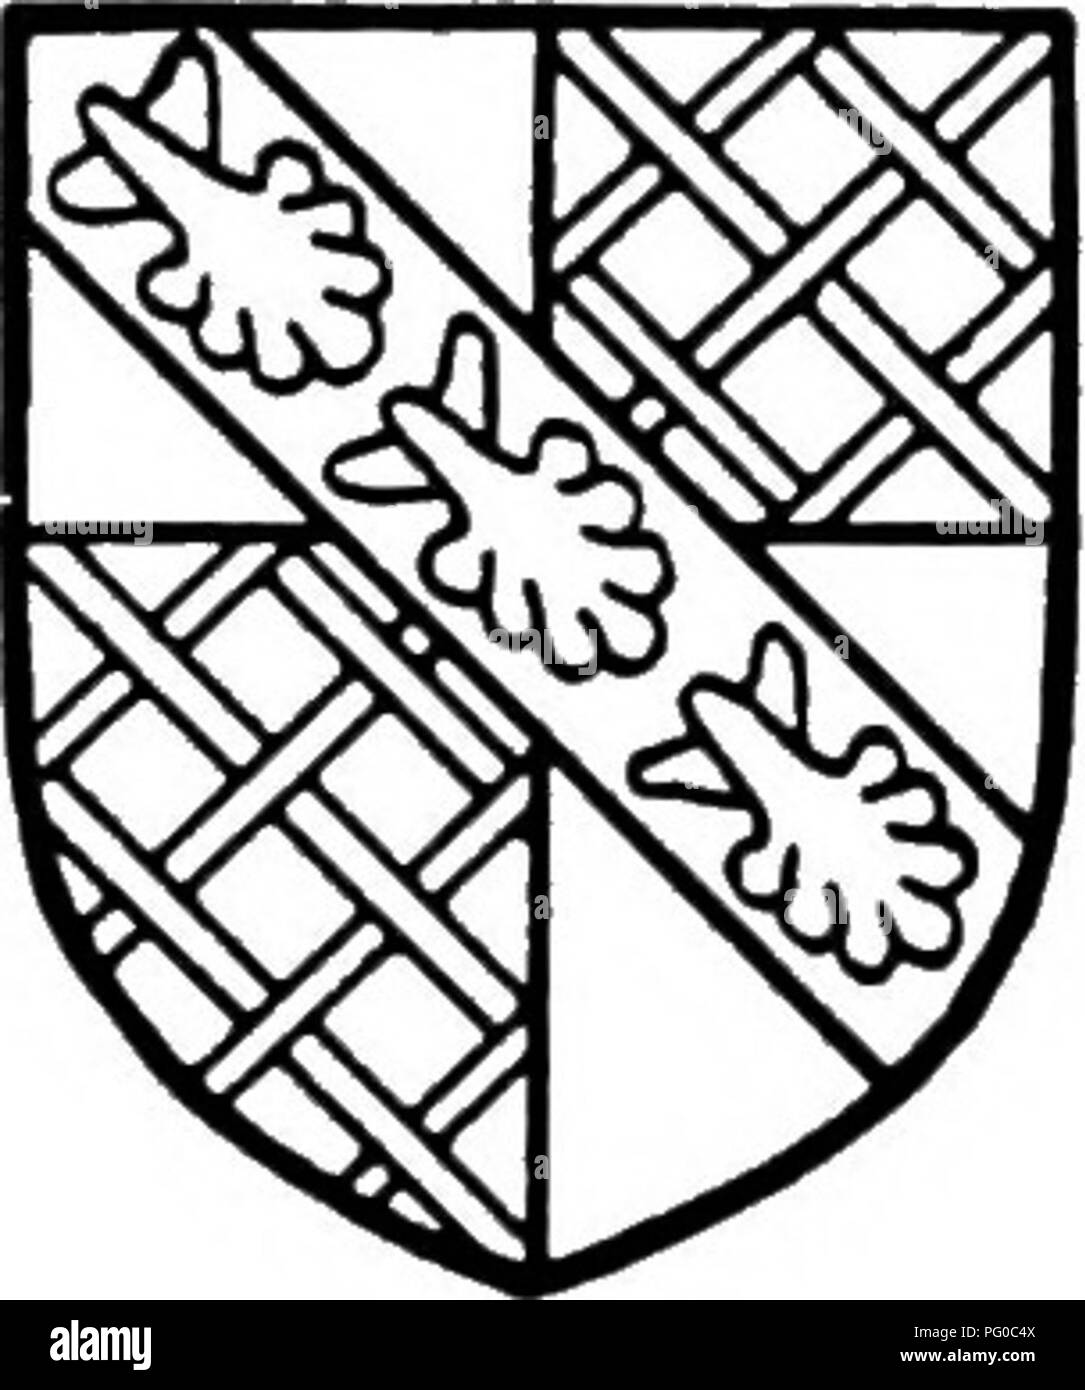 . The Victoria history of the county of Bedford. Natural history. ROTHERHAM, ytft three running hartl or. GosTwiCK. Argent a bend gules cotised table between six Cornish choughs. farm' of Chamberlains Bury on the former, who, dying in 1619, was succeeded by a son John Chishull, and he transferred the manor to Nicholas Franklin in 1638.'' The Franklins appear to have retained this manor for some time ; John Franklin was in posses- sion in 1759,&quot; but between that date and 1797 it had become the property of Earl Spencer, to whom Dunton Goyes (q.v.) at this time belonged, and the manors have  Stock Photo